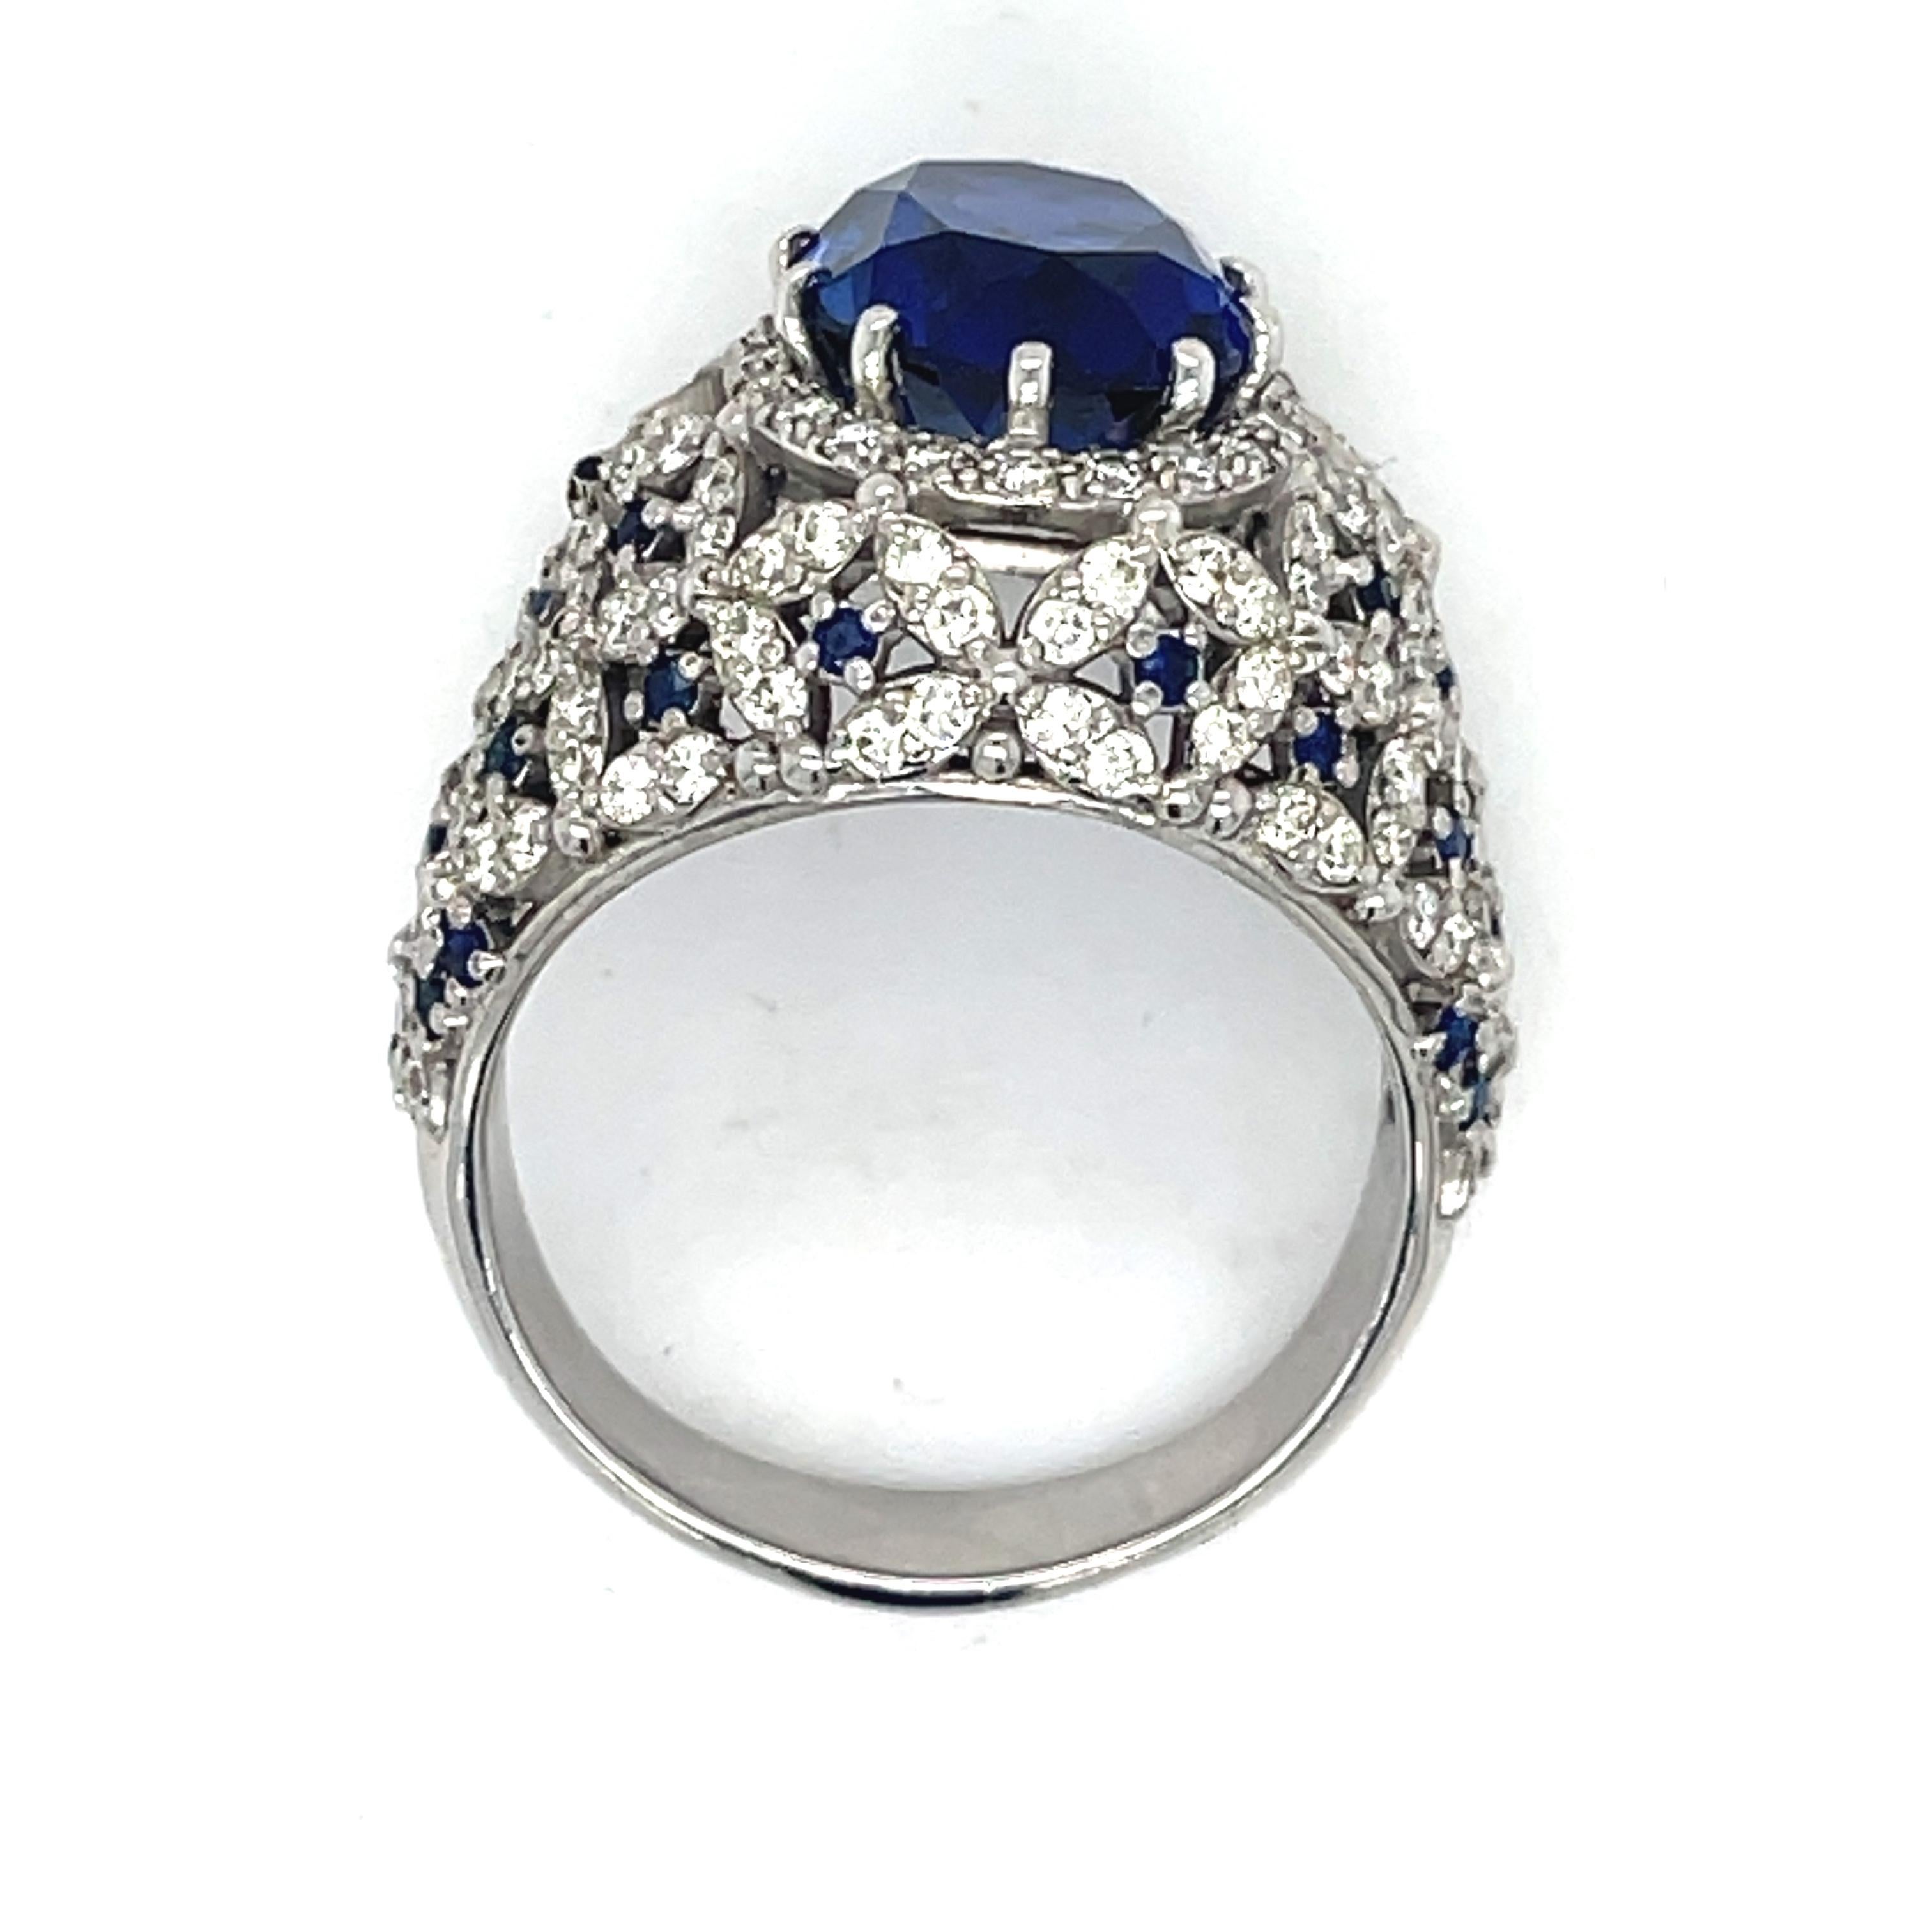 Cocktail Dome ring, synthetic Blue Corundum, Sapphire, and diamond, 14K white gold

Jewelry Material: White Gold 14k (the gold has been tested by a professional)
Total Carat Weight: 7.25ct (Approx.)
Total Metal Weight: 8.63g
Size: 8 US


Grading